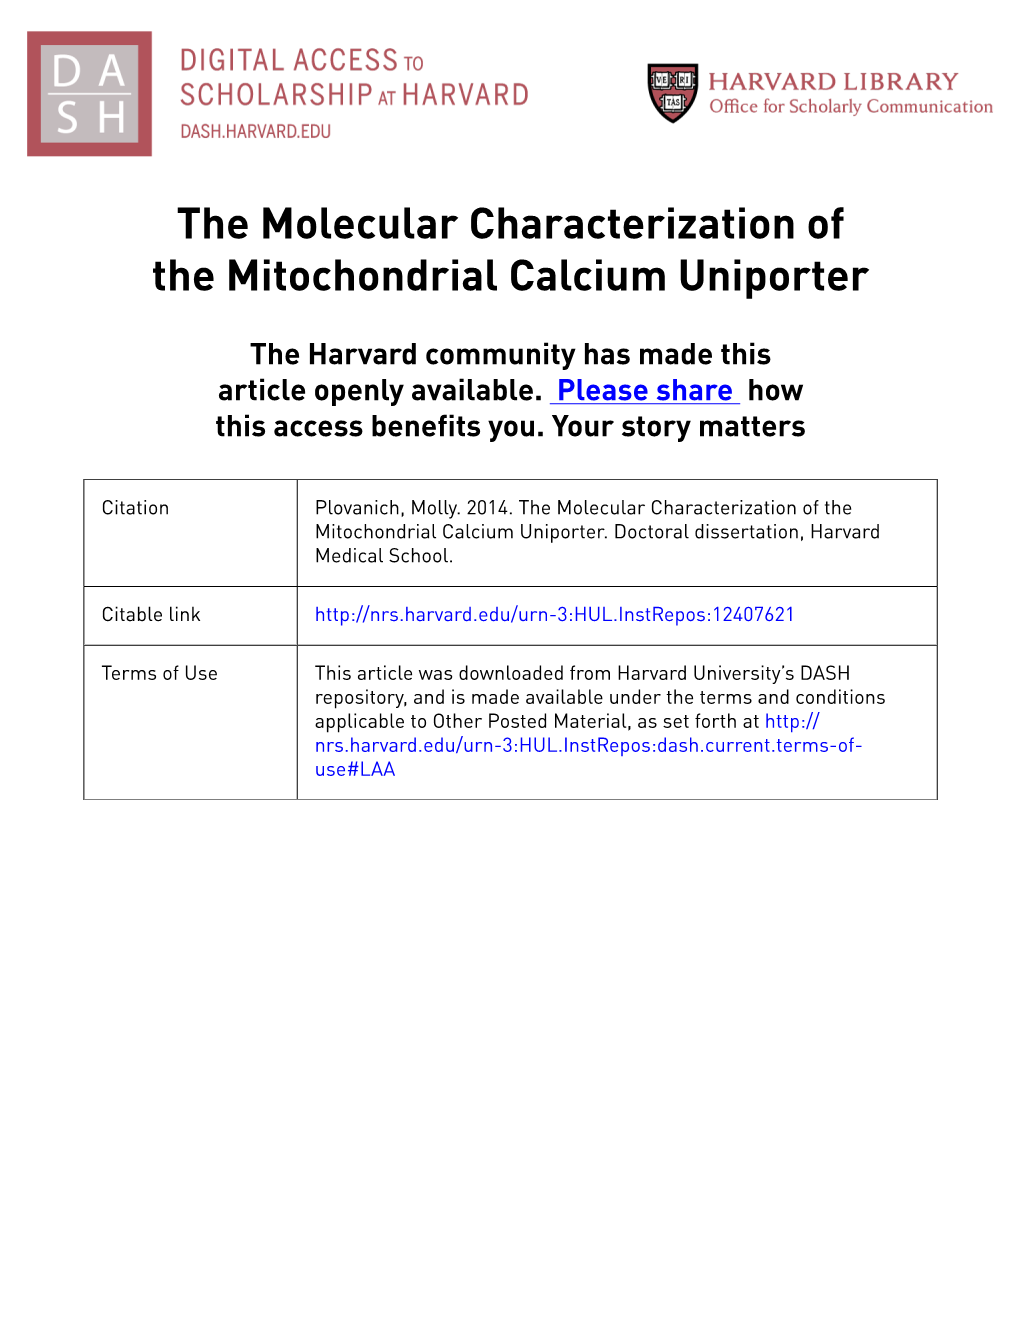 The Molecular Characterization of the Mitochondrial Calcium Uniporter